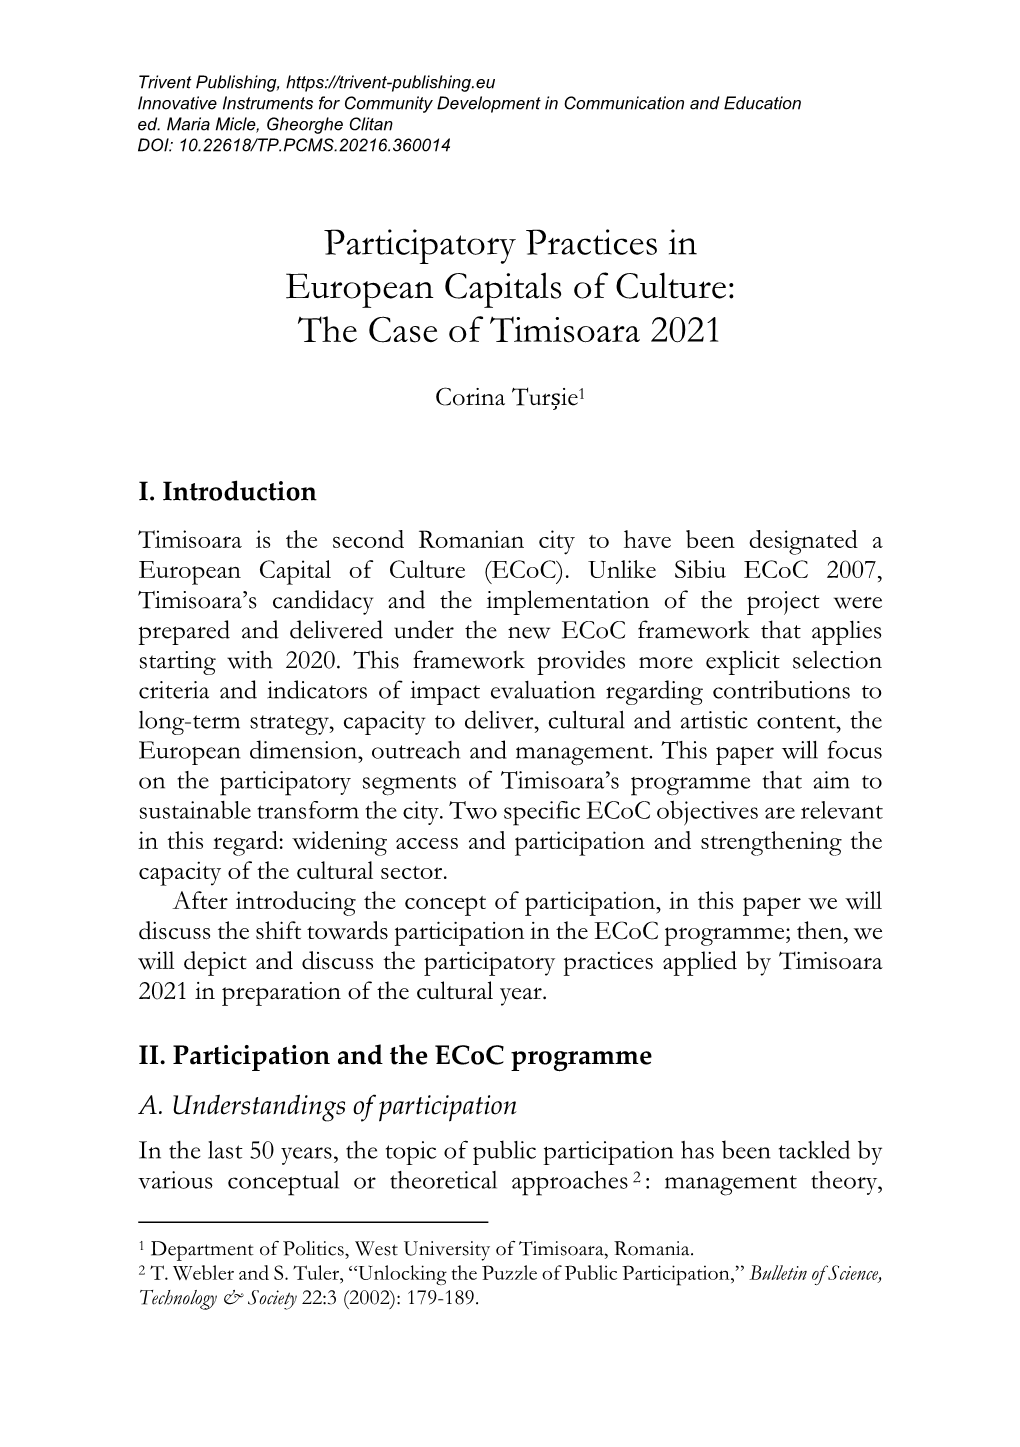 Participatory Practices in European Capitals of Culture: the Case of Timisoara 2021